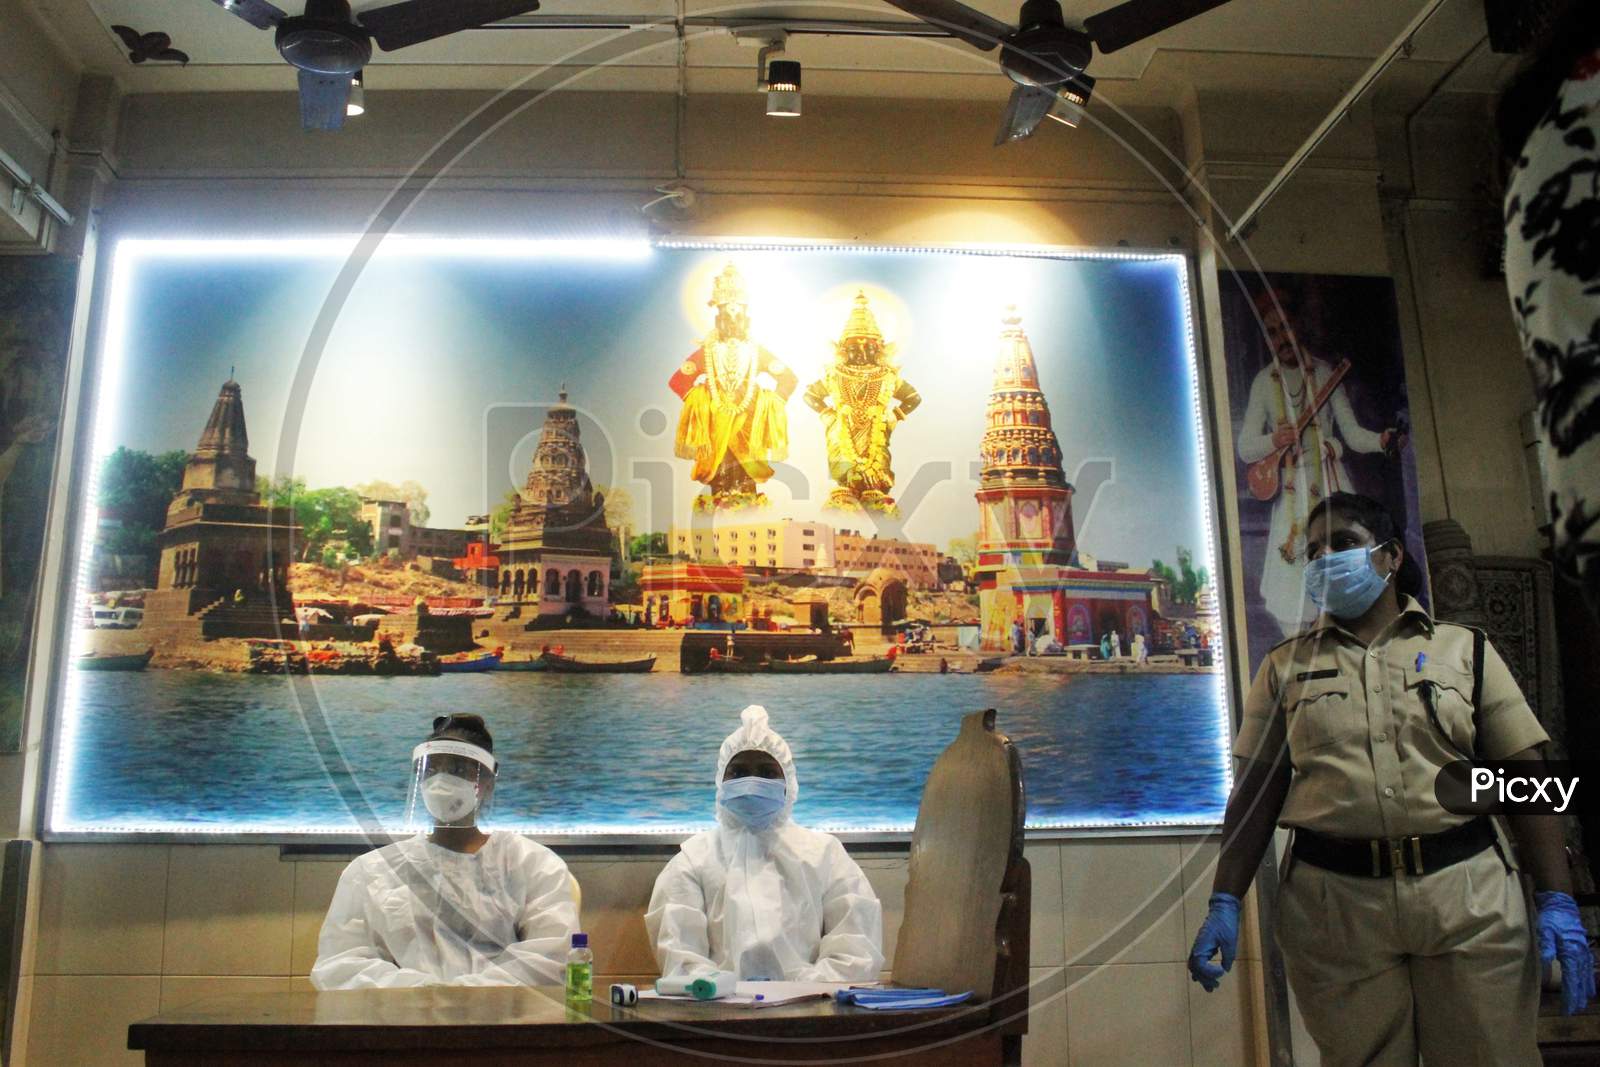 Healthcare workers wearing a Personal Protective Equipment (PPE) wait to screen people at a camp set up for the coronavirus disease (COVID-19),inside a temple in Mumbai, India on July 15, 2020.